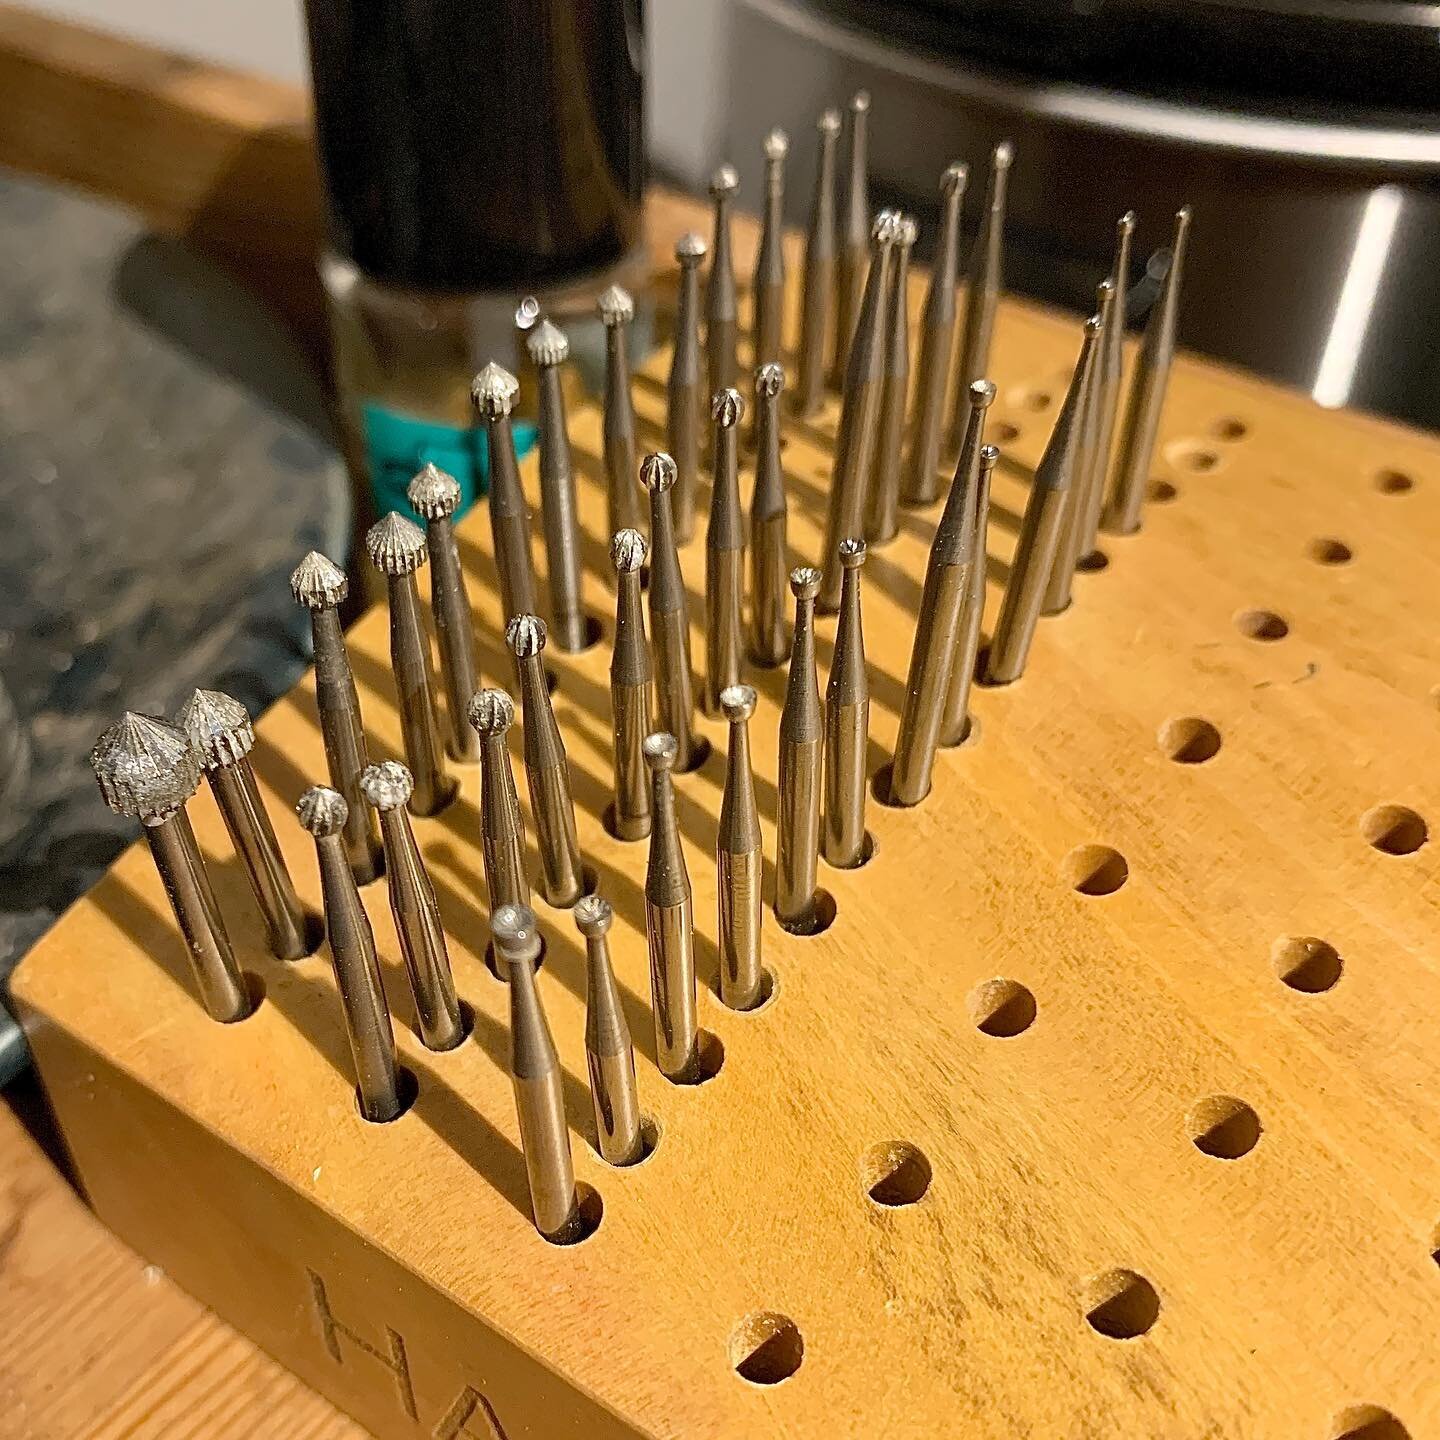 Don&rsquo;t be afraid to alter your tools! 
Here I drilled an extra hole between each existing one to fit all my burr&rsquo;s! 

#jewelrystudio #jewellerystudio #jewelrybench #jewellerybench #jewellerybenchspace  #jewellersbench #jewelersbench #jewel